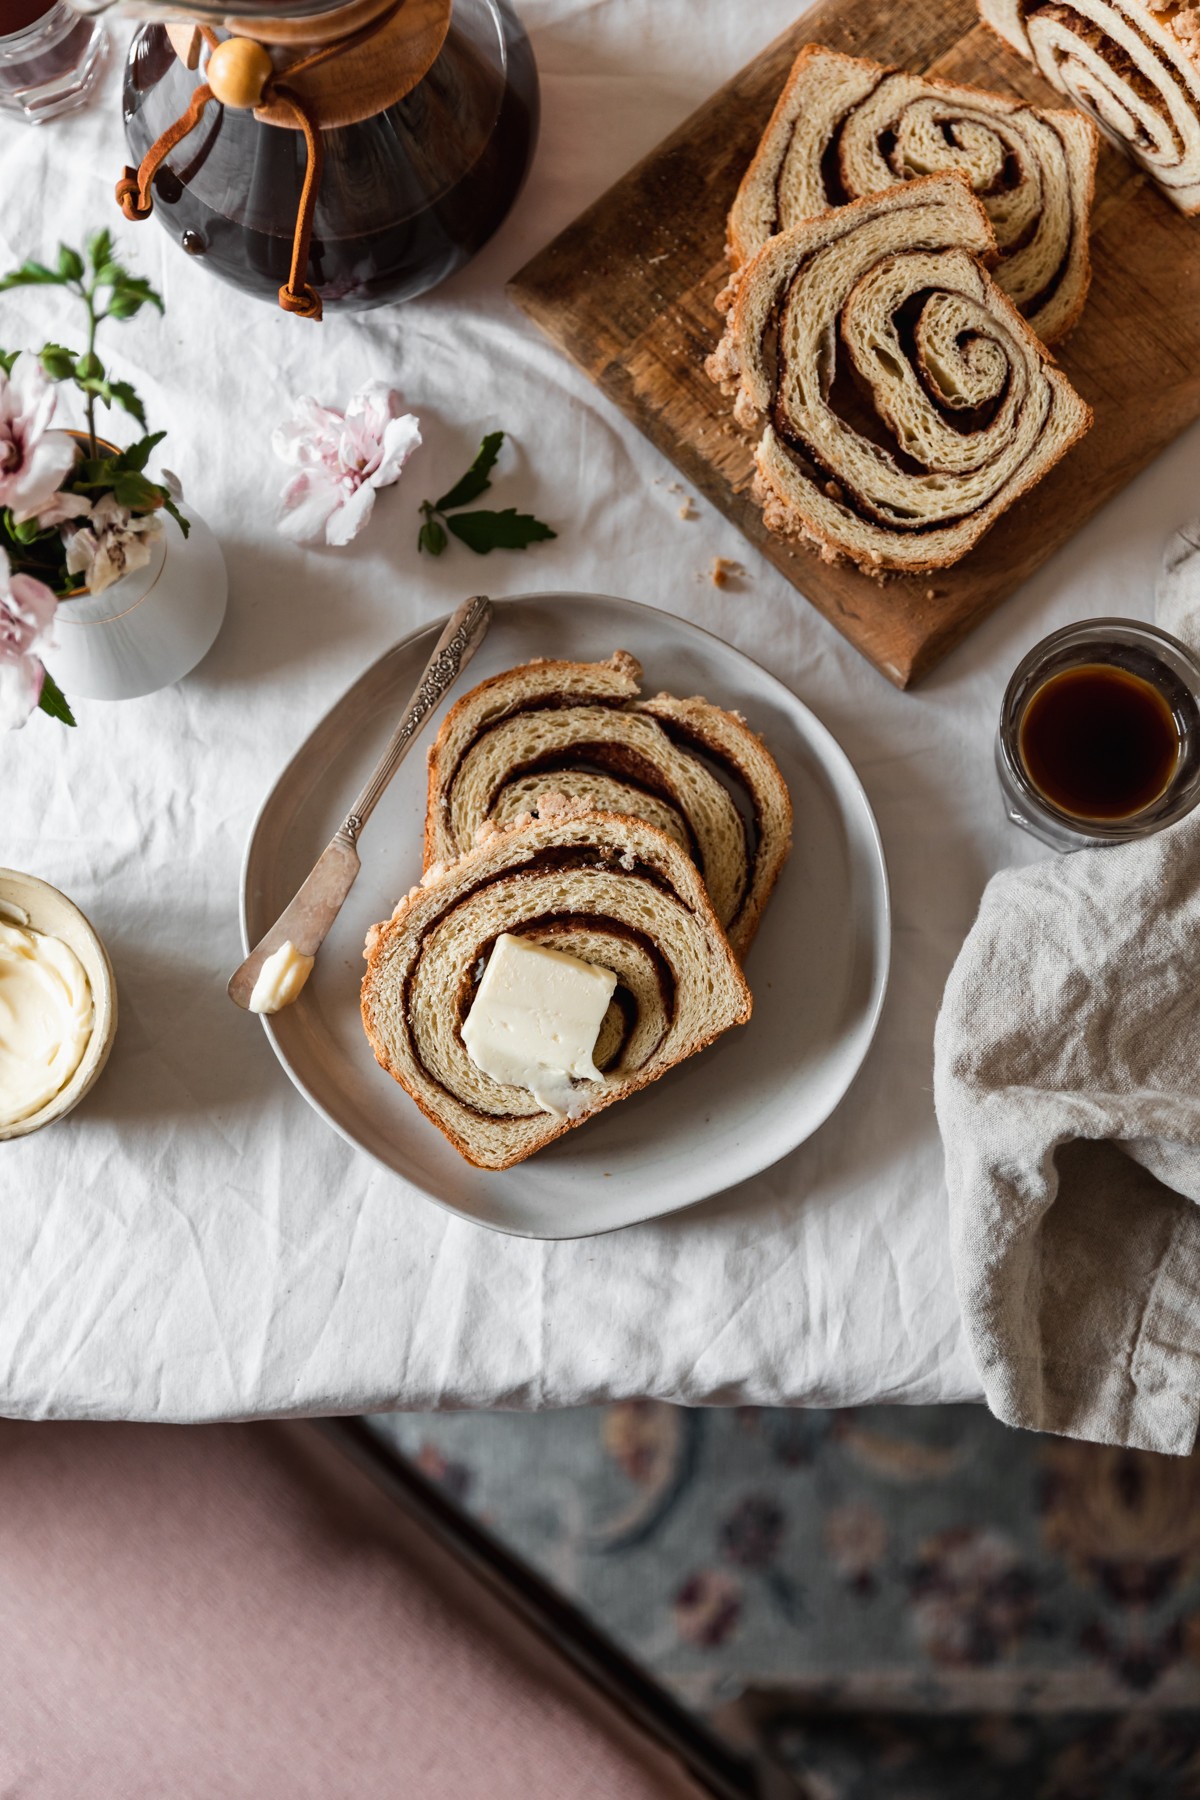 An overhead image of two slices of cinnamon swirl bread with streusel and a butter knife on a white plate. The plate is next to a wood board in the right corner topped with more bread, a beige linen, cups of coffee, a Chemex, and a bowl of butter on a white table cloth. In the bottom of the photo, you can see a green and pink vintage rug and a pink seat cushion.